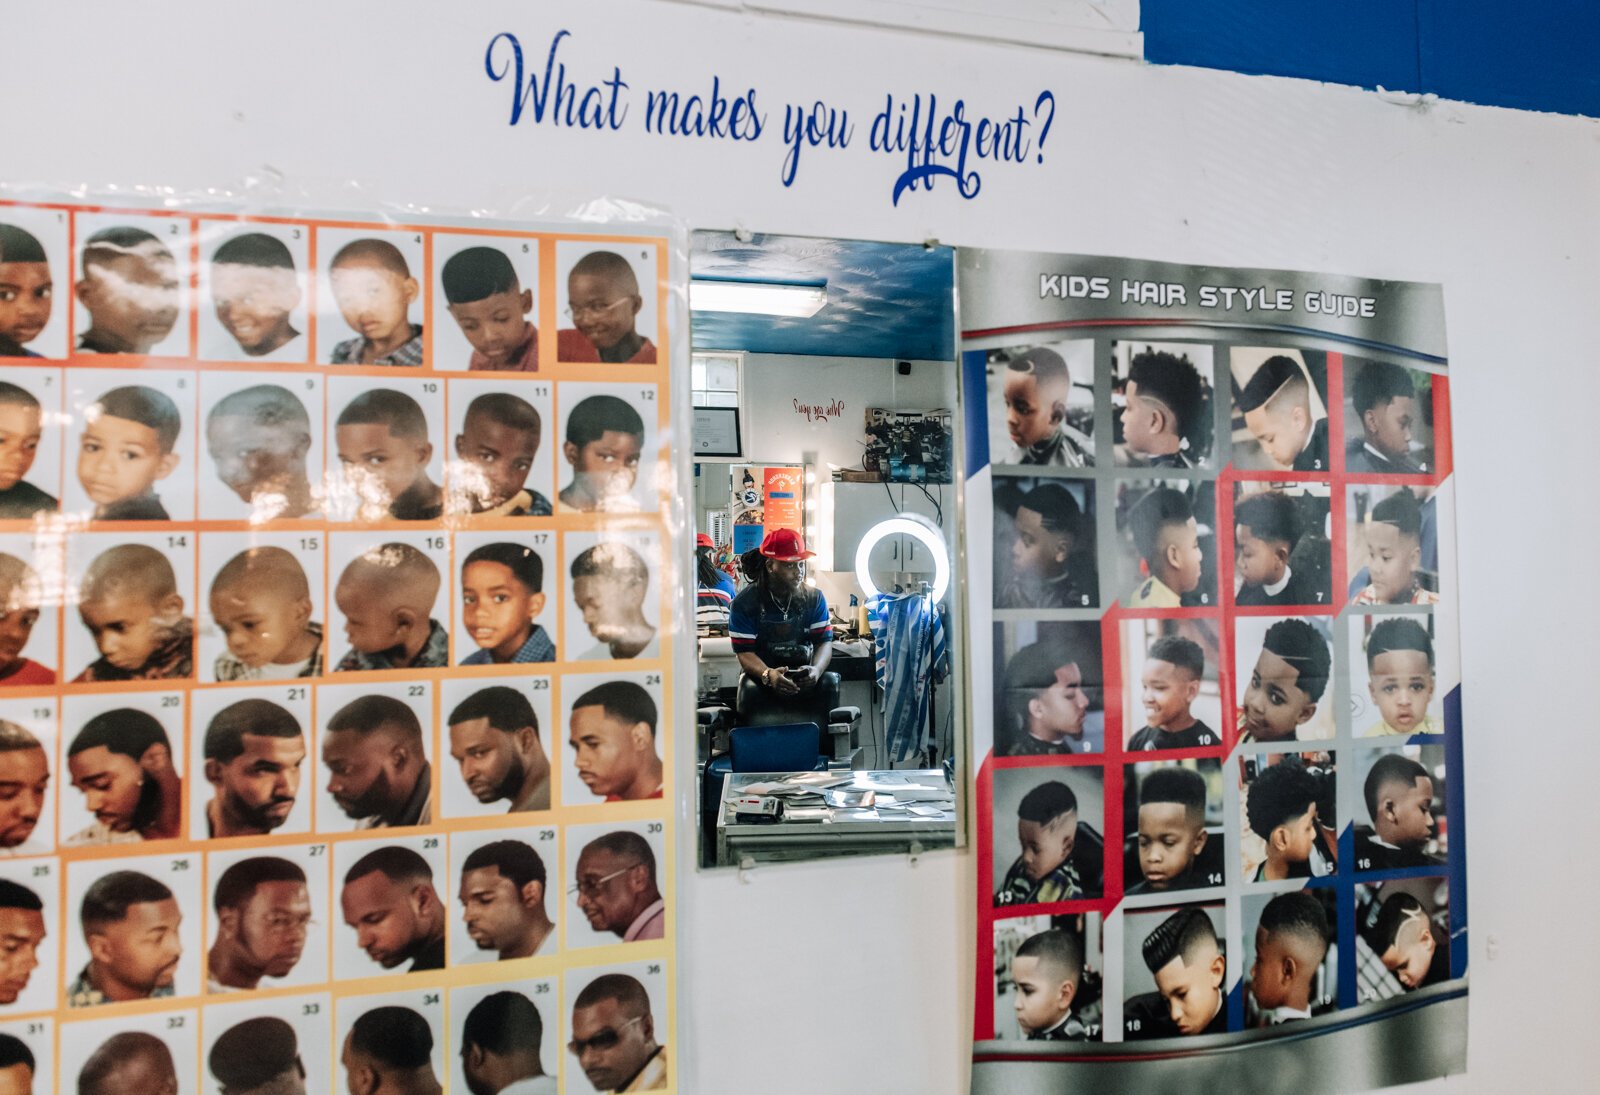  A display showcasing different hairstyles with local barber Benson Harvey, owner of Smooth Kutz.